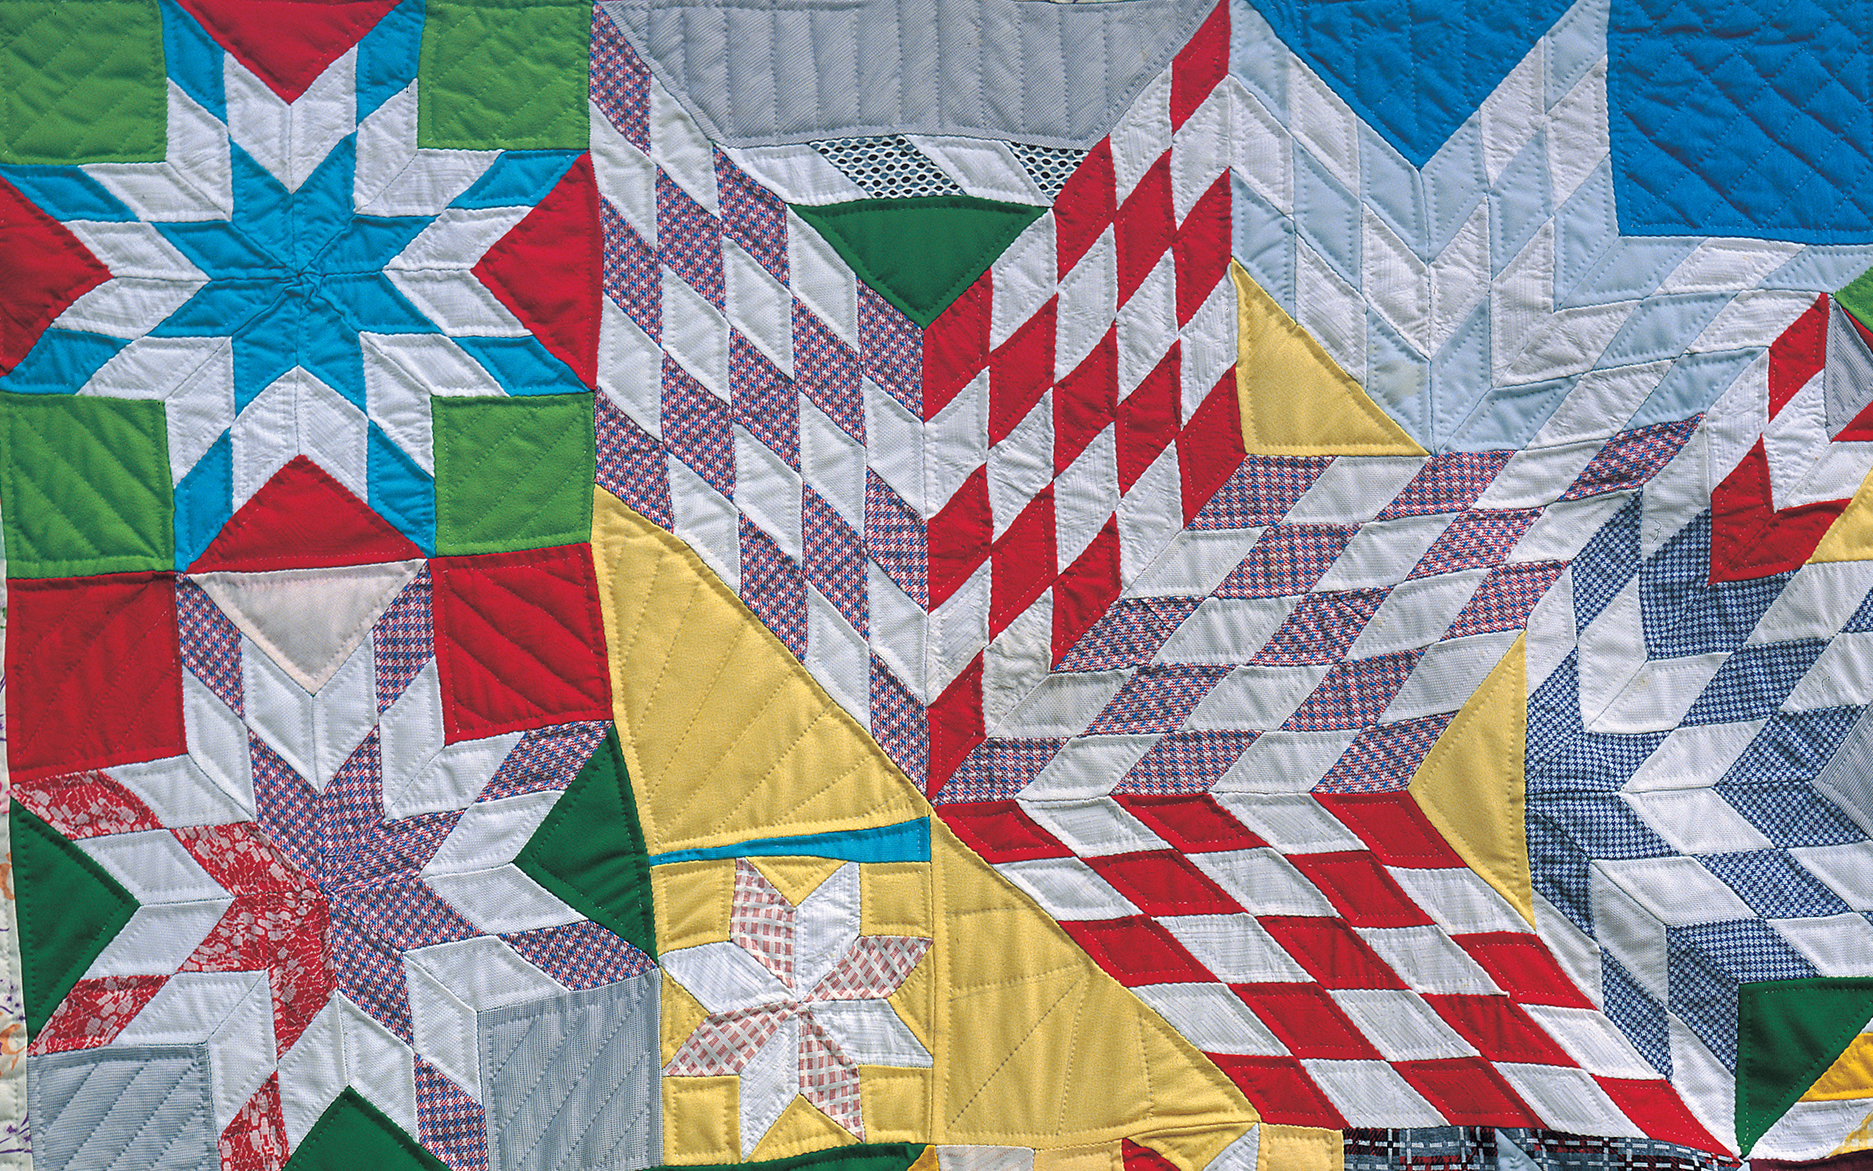 quilt made of a star pattern in red, yellow, purple and white